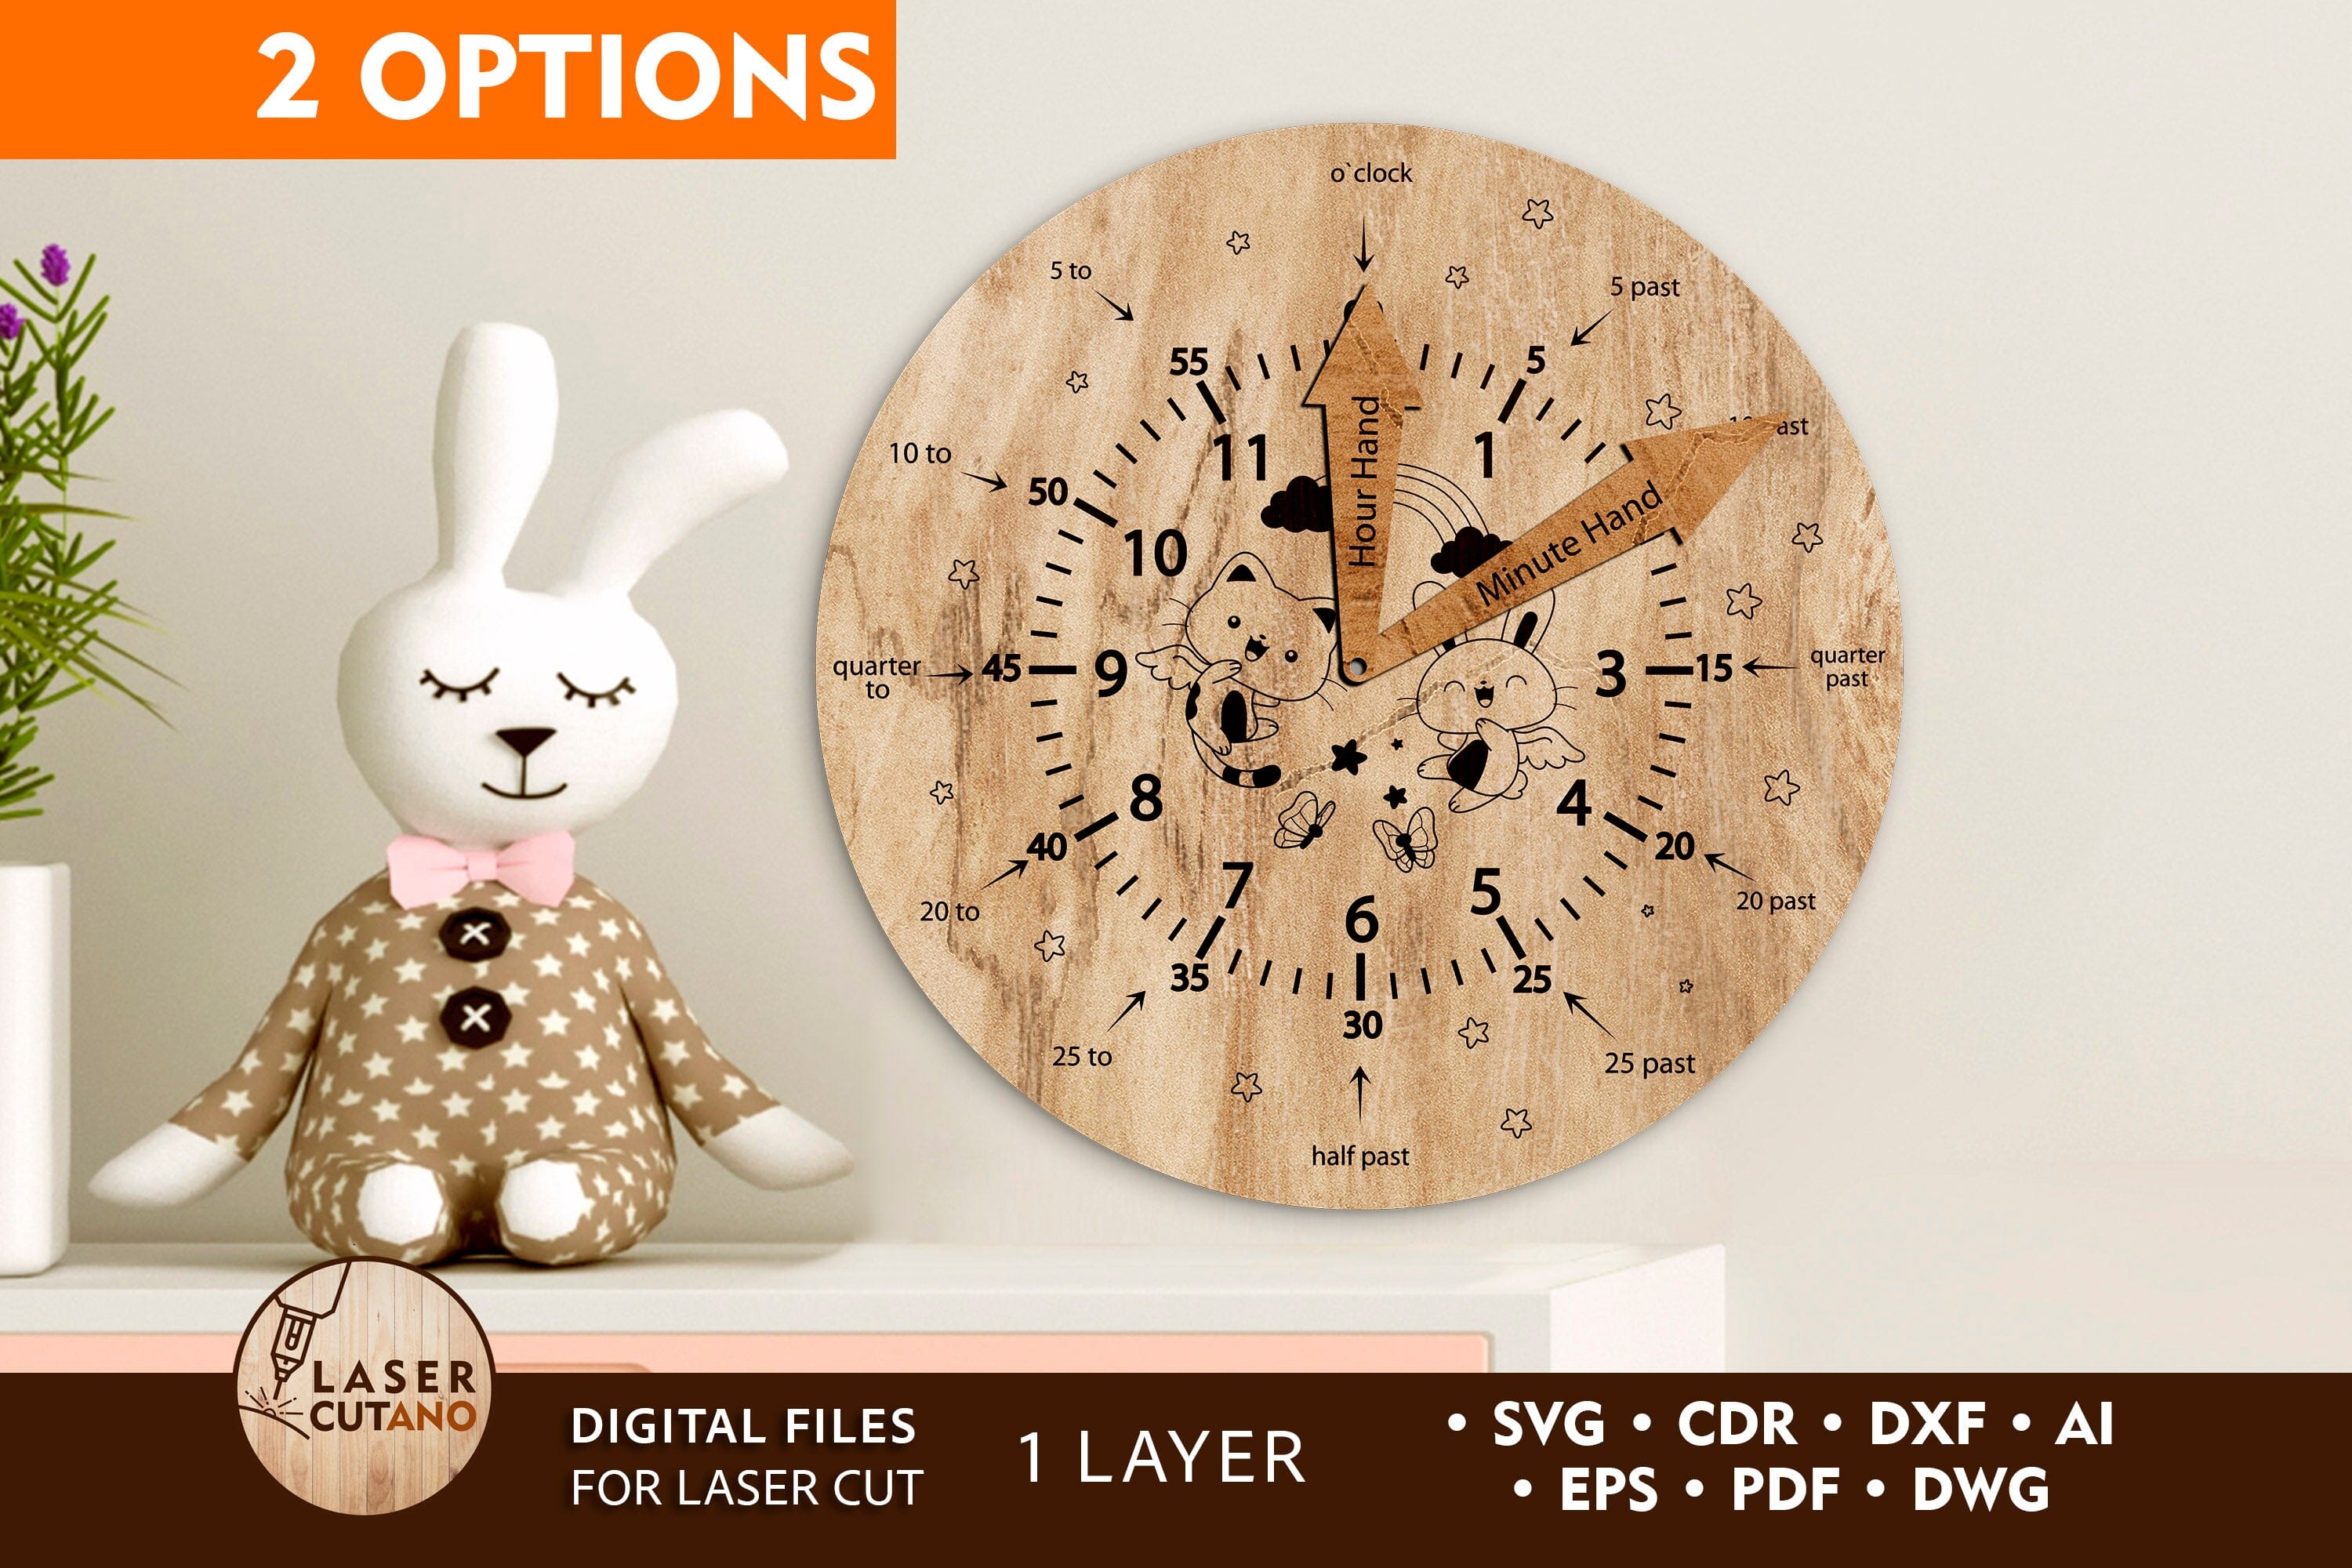 CLOCK FACE, Sublimation Blanks, Unisub, Blanks for Sublimation, Photo  Frame, Diy, Wall Decor, Gifts, Wall Clock, Clock, Home Decor, Wall Art 